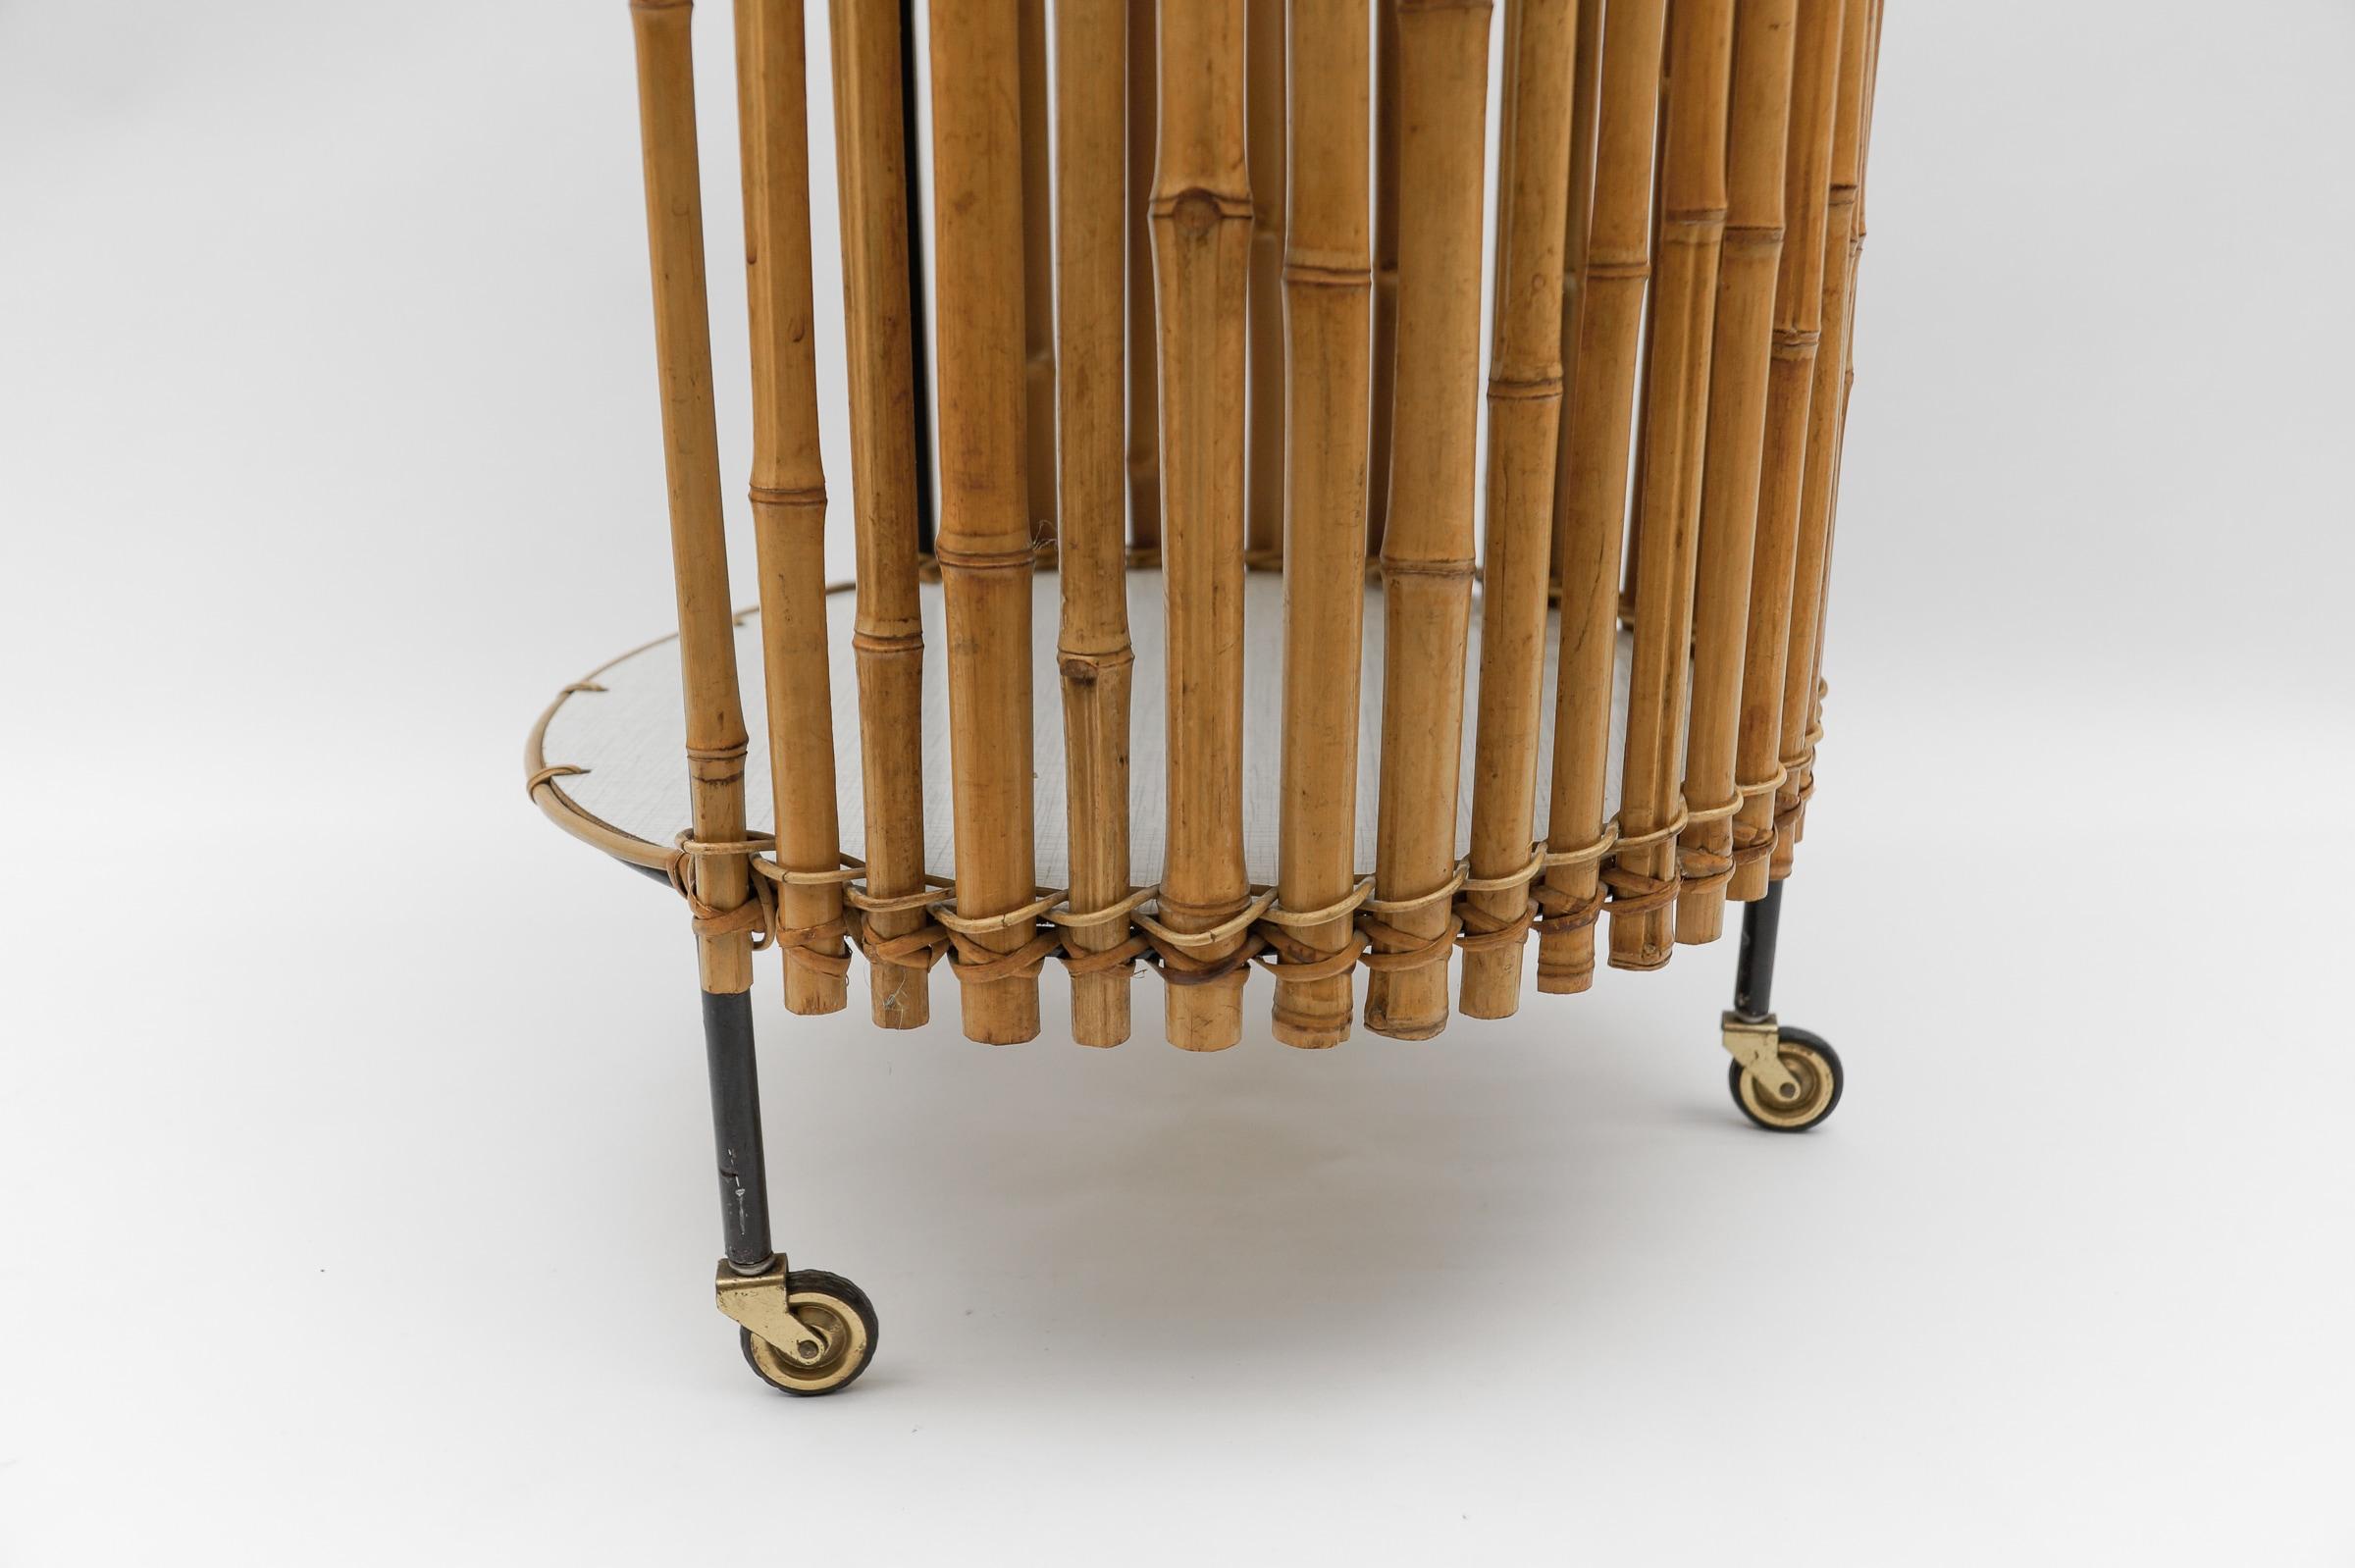 Stunning Mid-Century Modern Round Serving Cart in Bamboo and Metal, 1950s For Sale 7